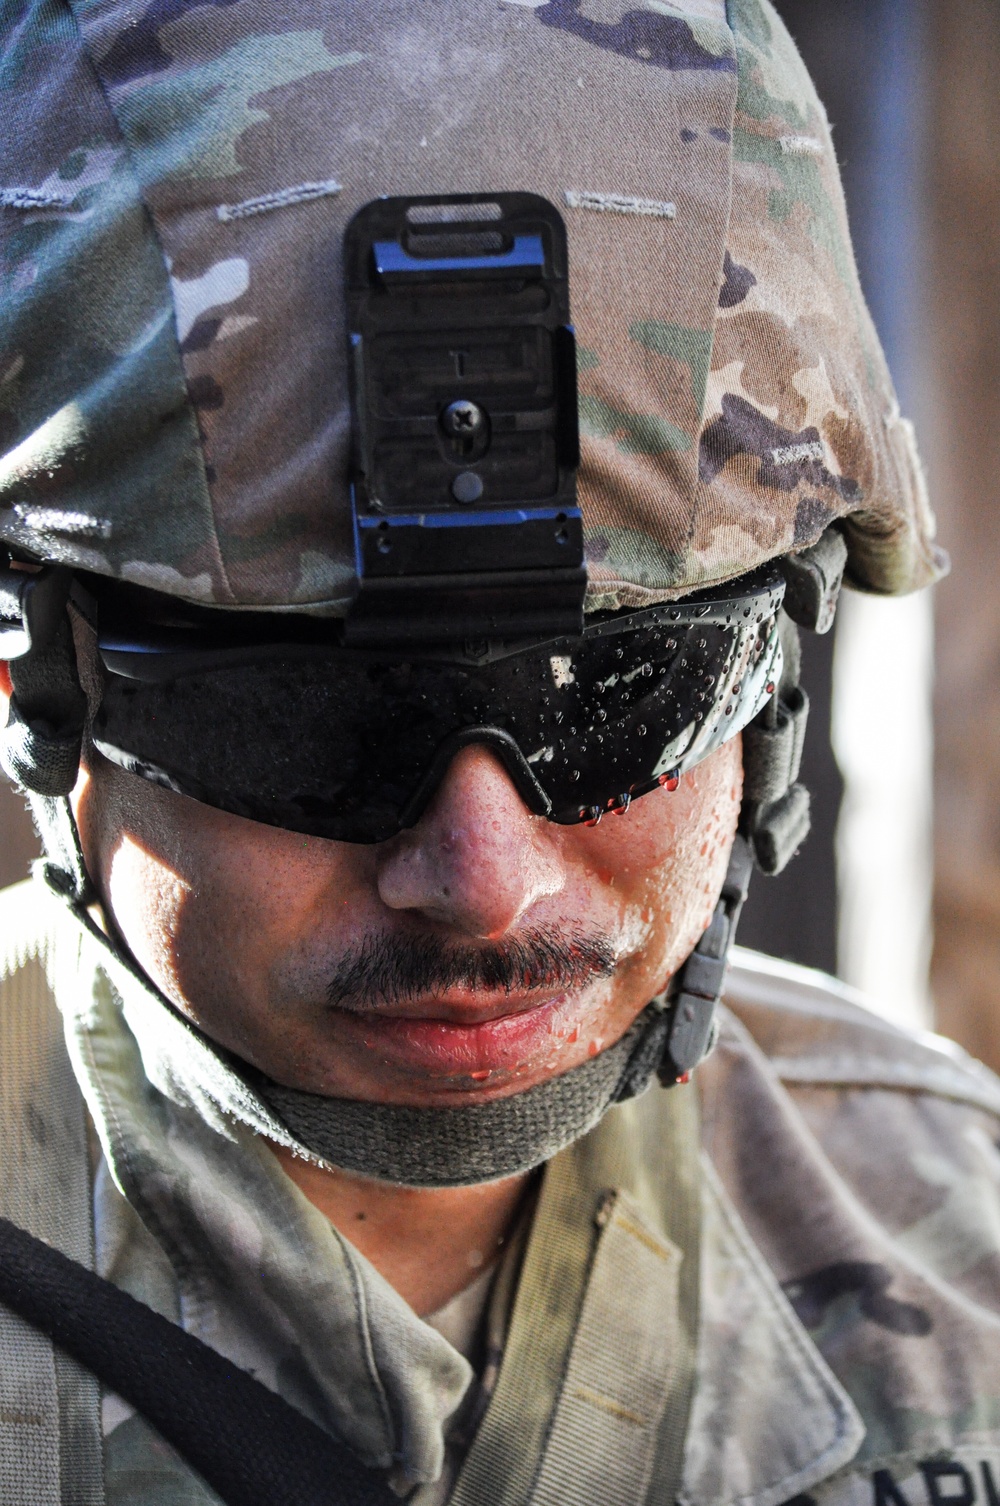 Simulated casualty blood drips from the glasses of a CA NCO during training